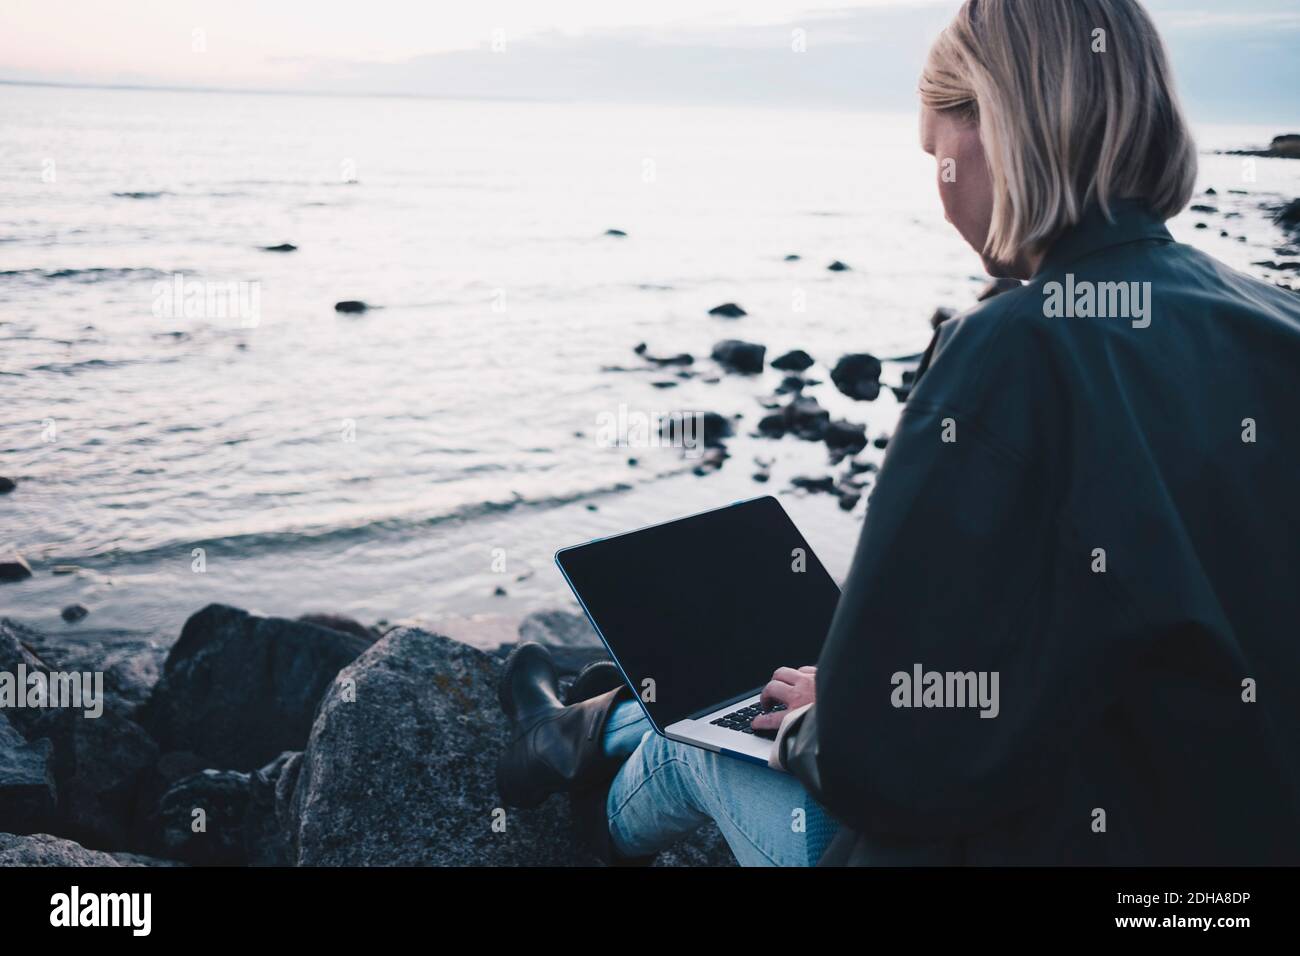 Rear view of woman using laptop while sitting on rock at lakeshore Stock Photo